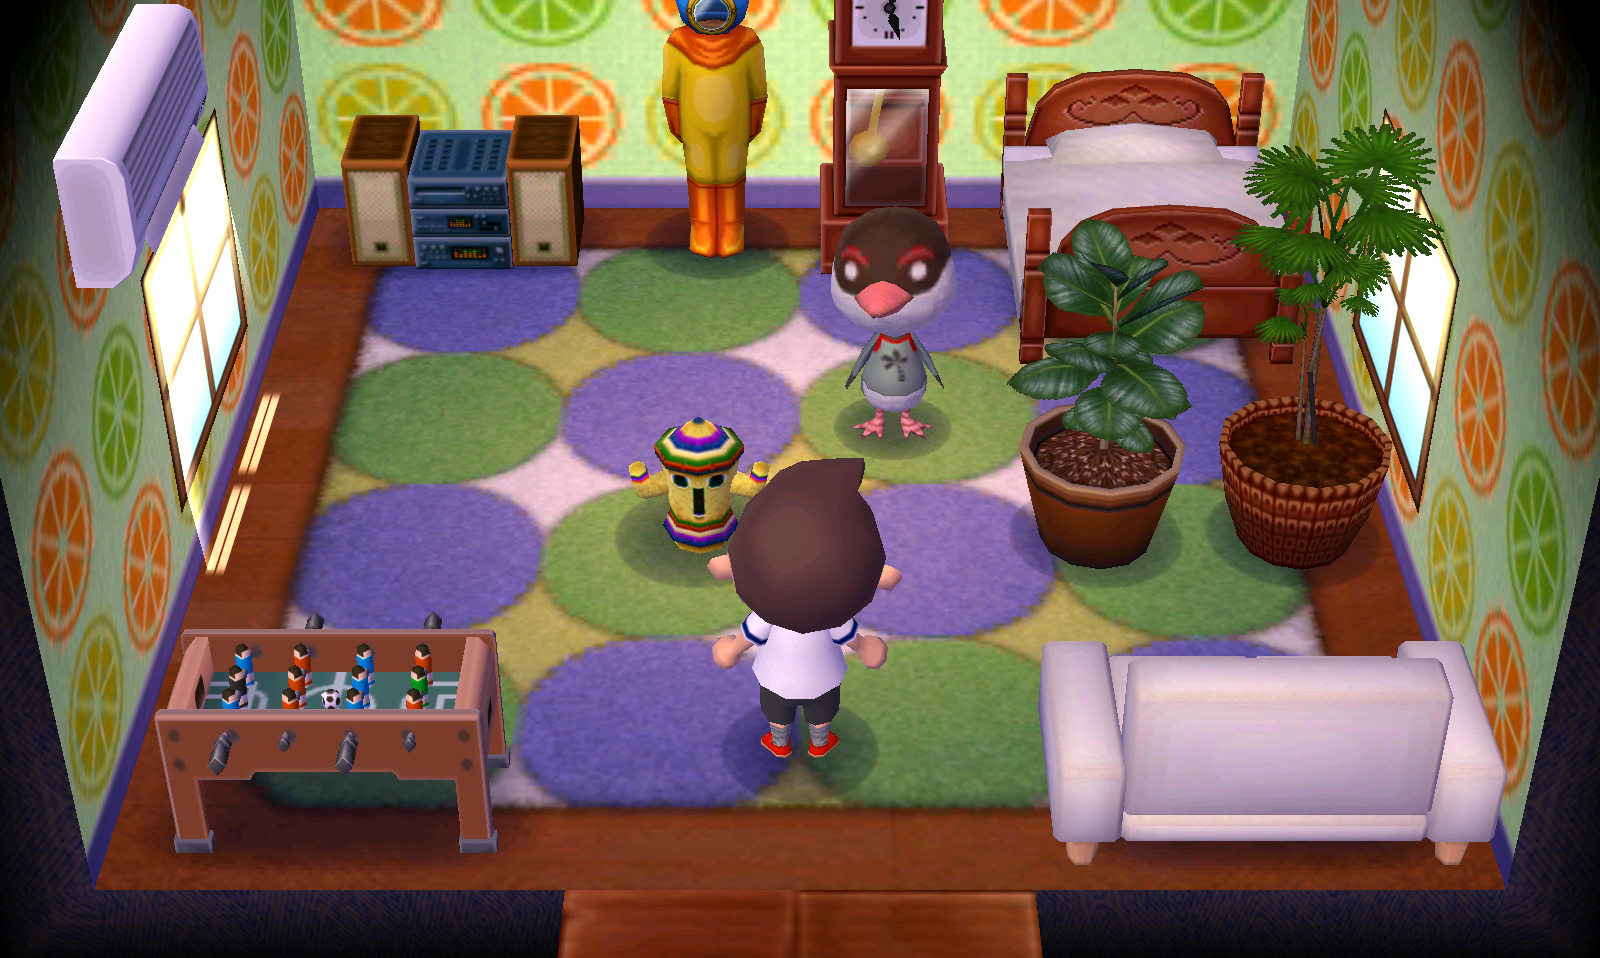 Interior of Peck's house in Animal Crossing: New Leaf